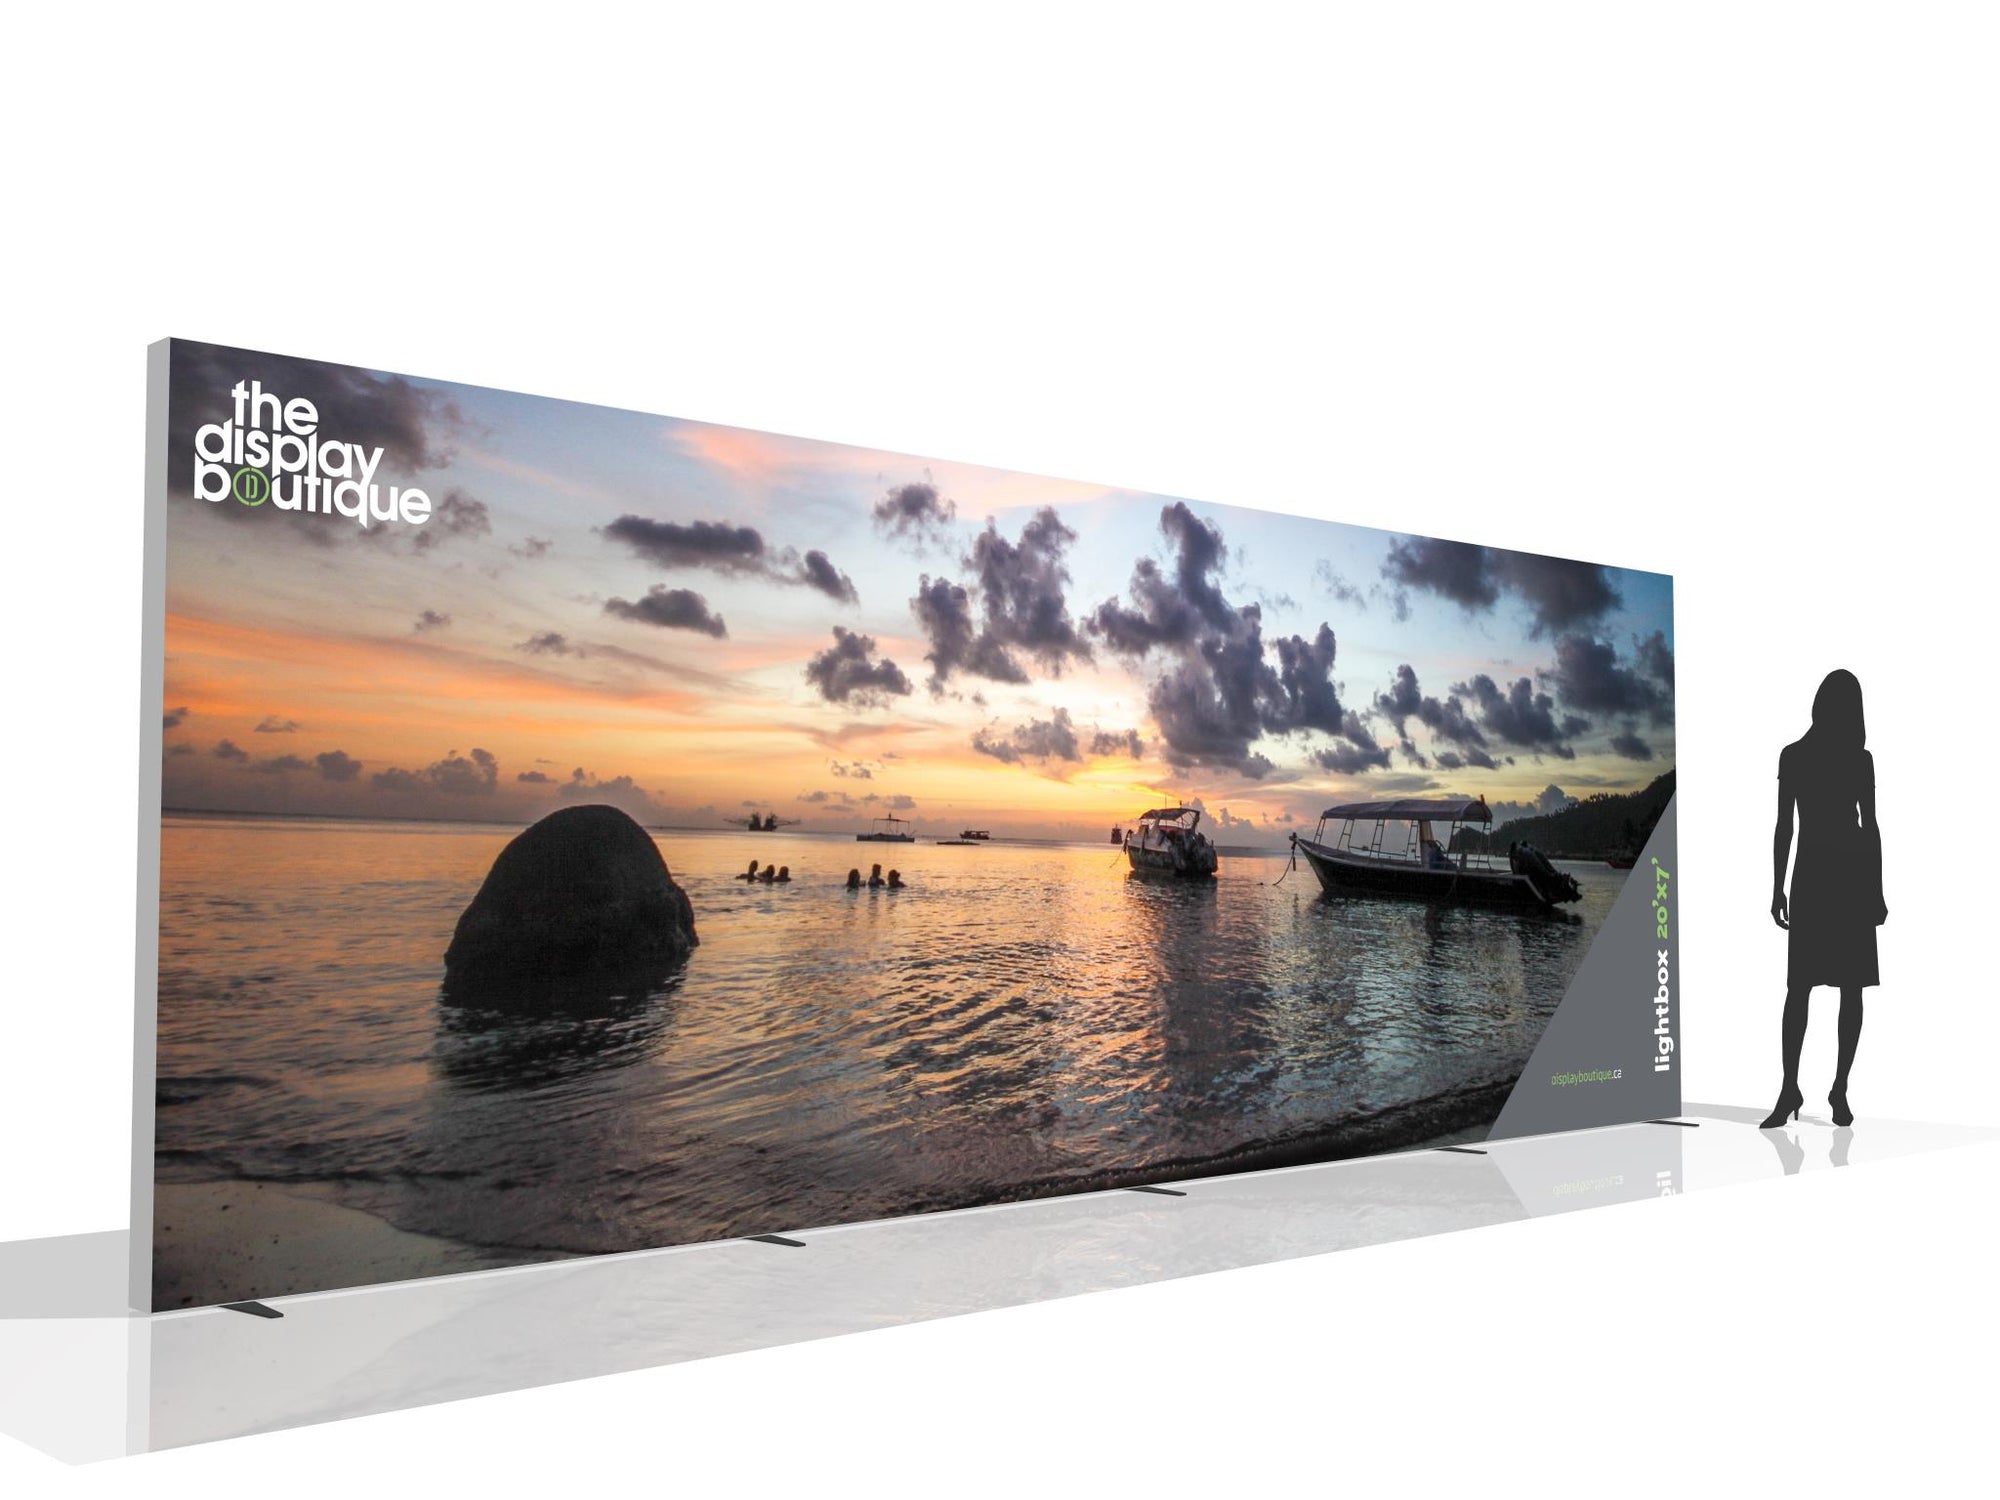 Freestanding Lightbox (Double-Sided) 20' x 7' (View 01)